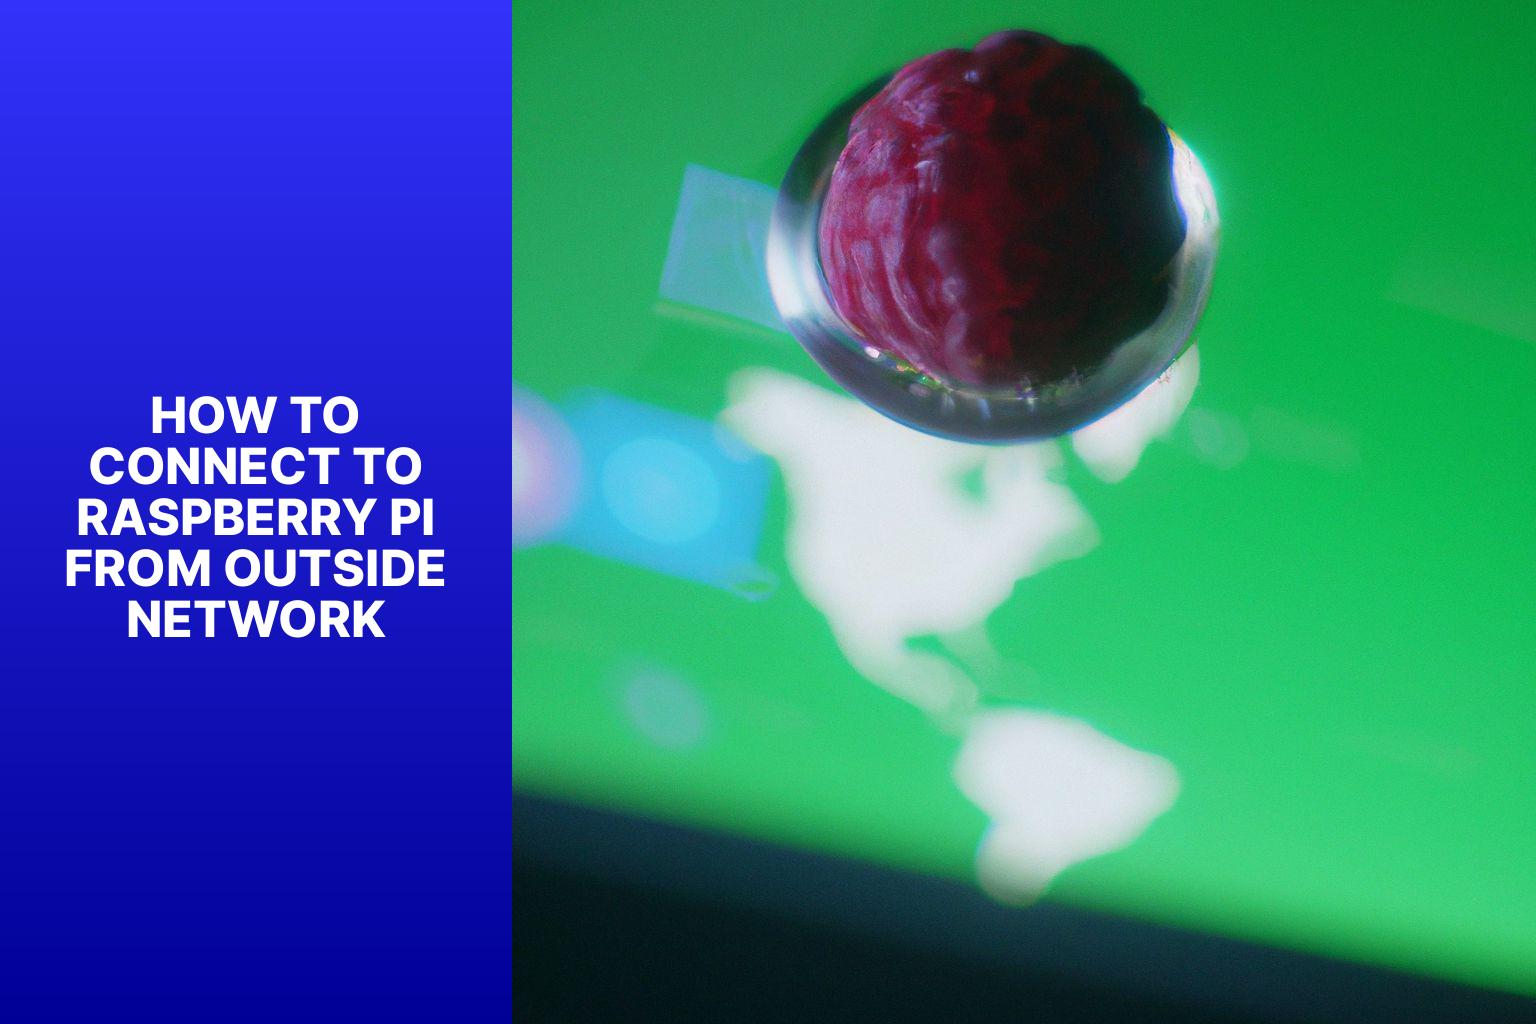 How To Connect To Raspberry Pi From Outside Network